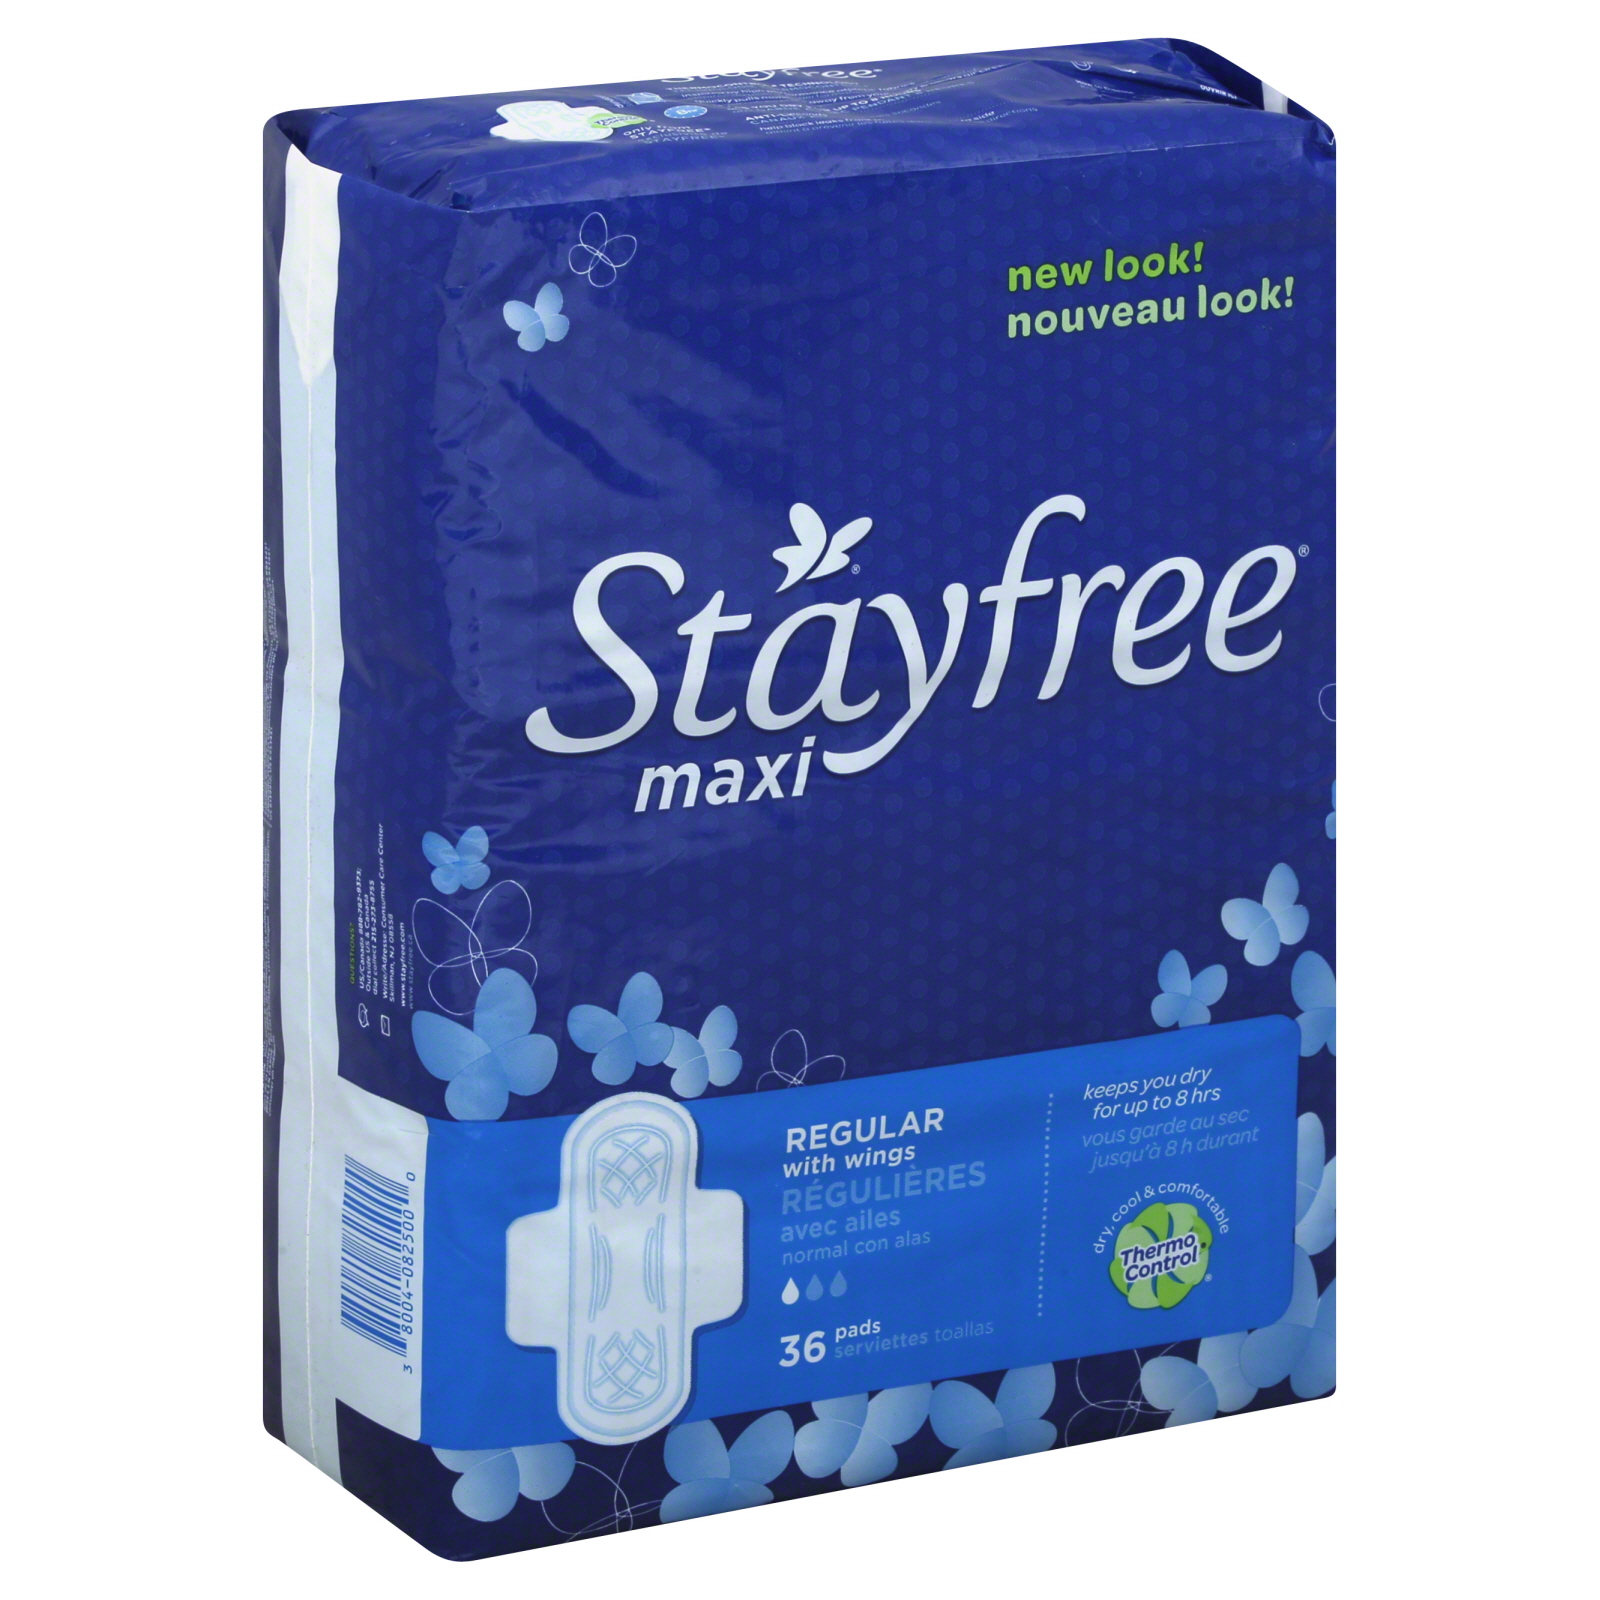 Stayfree Maxi Pads, Regular with Wings, 36 pads